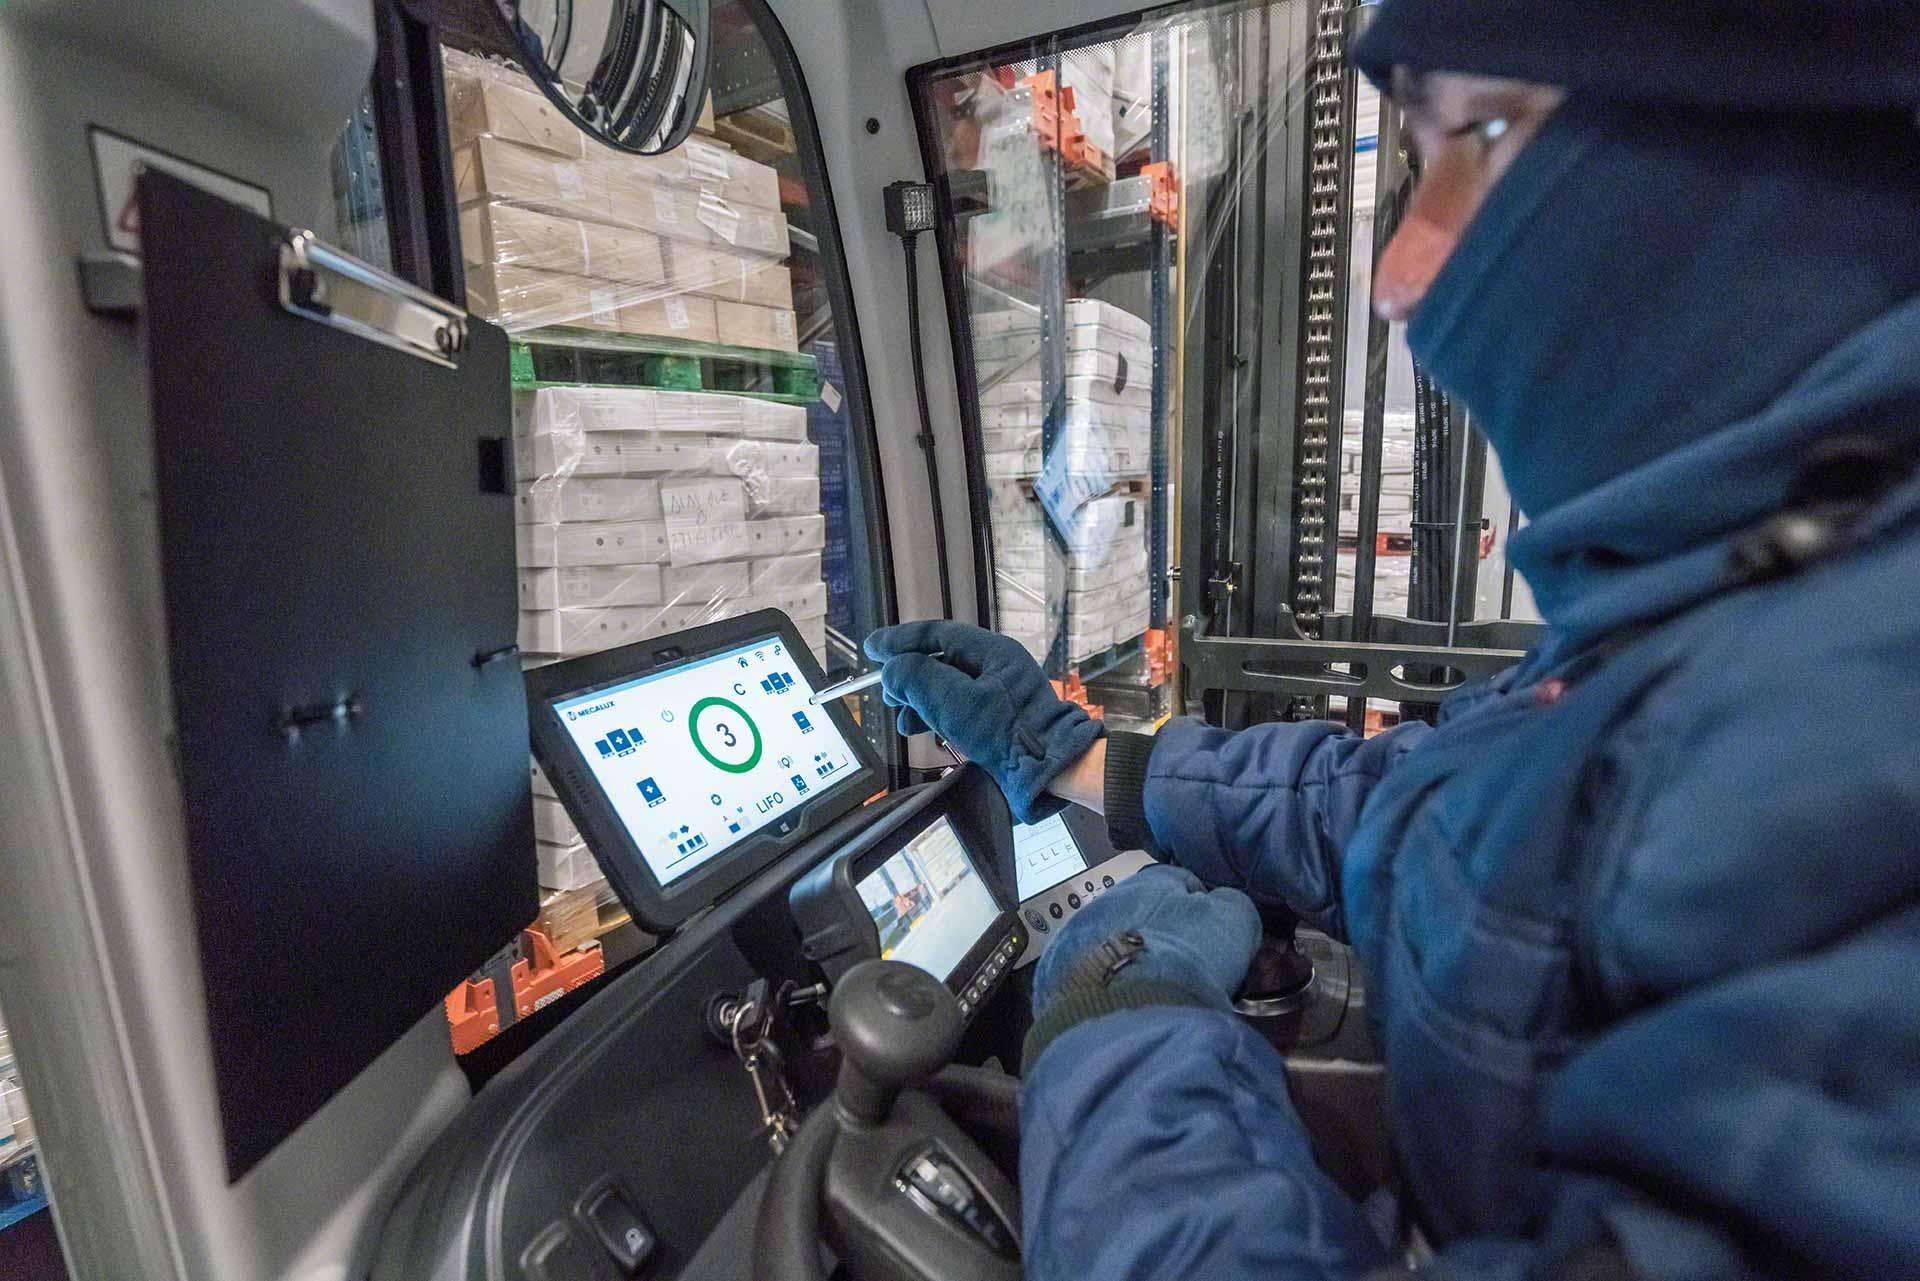 An operator uses a tablet in a cold room